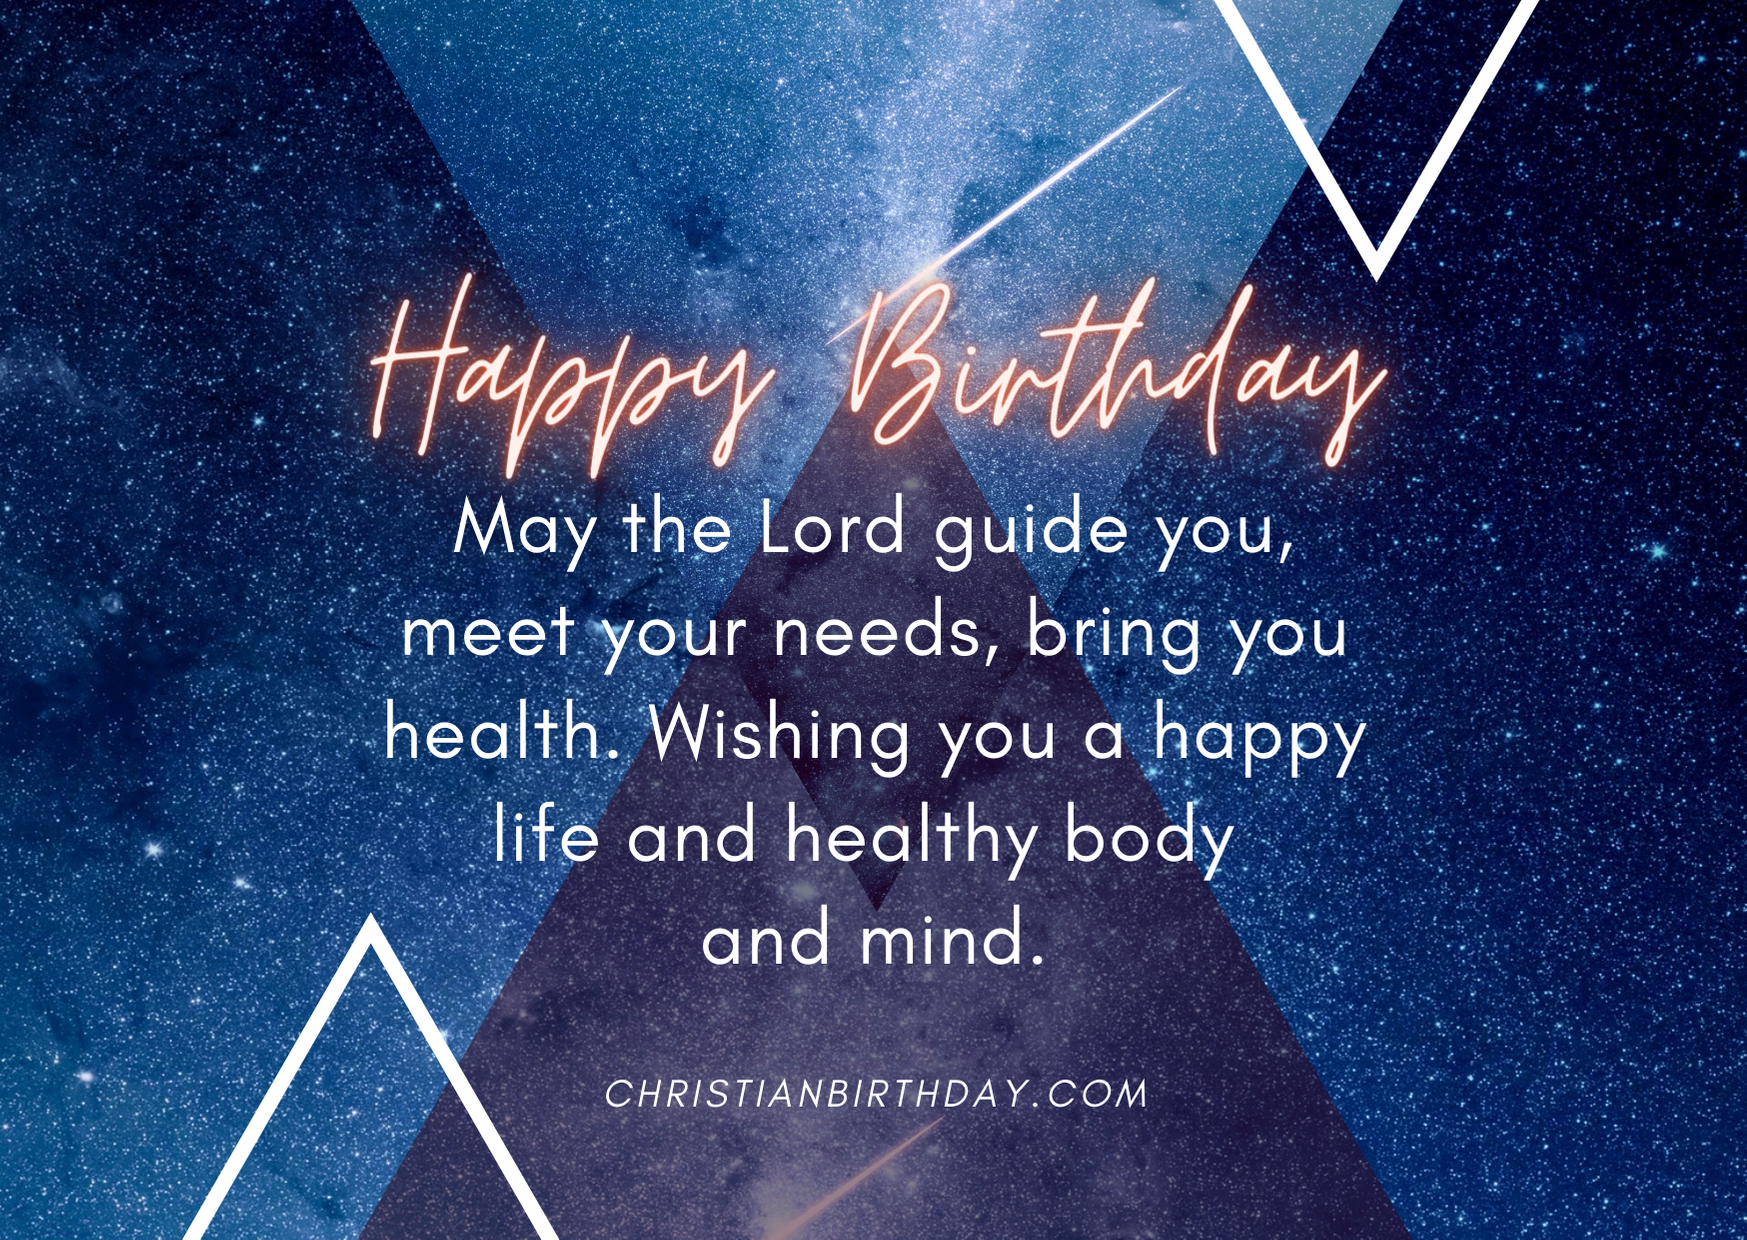 Religious Christian Birthday Wishes And Quotes Christian Birthday